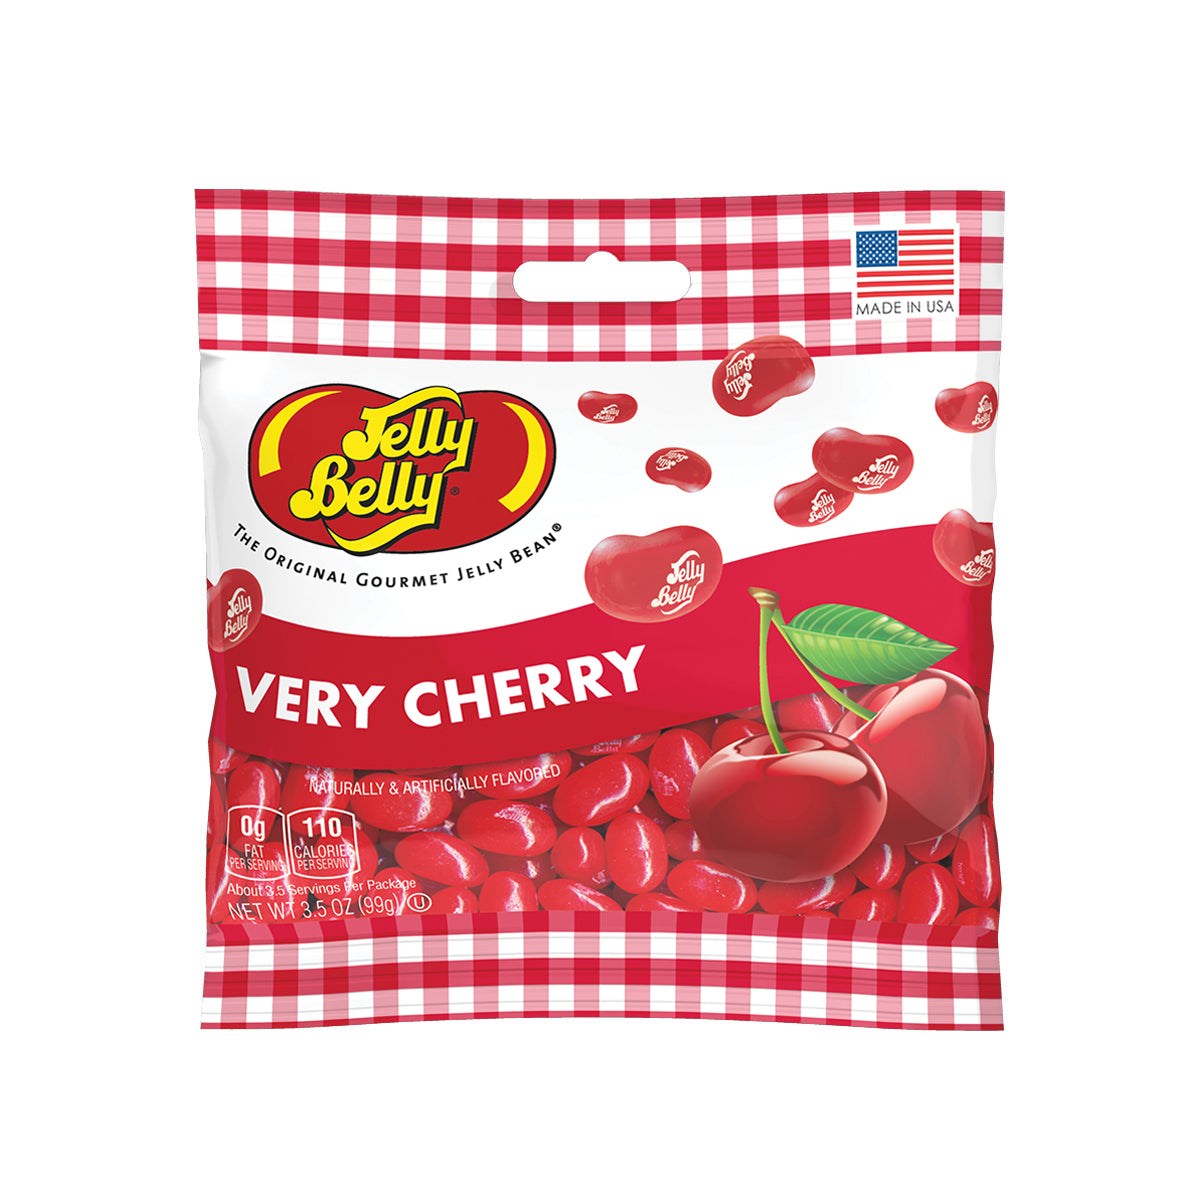 Jelly Belly Very Cherry Jelly Beans, 3.5oz